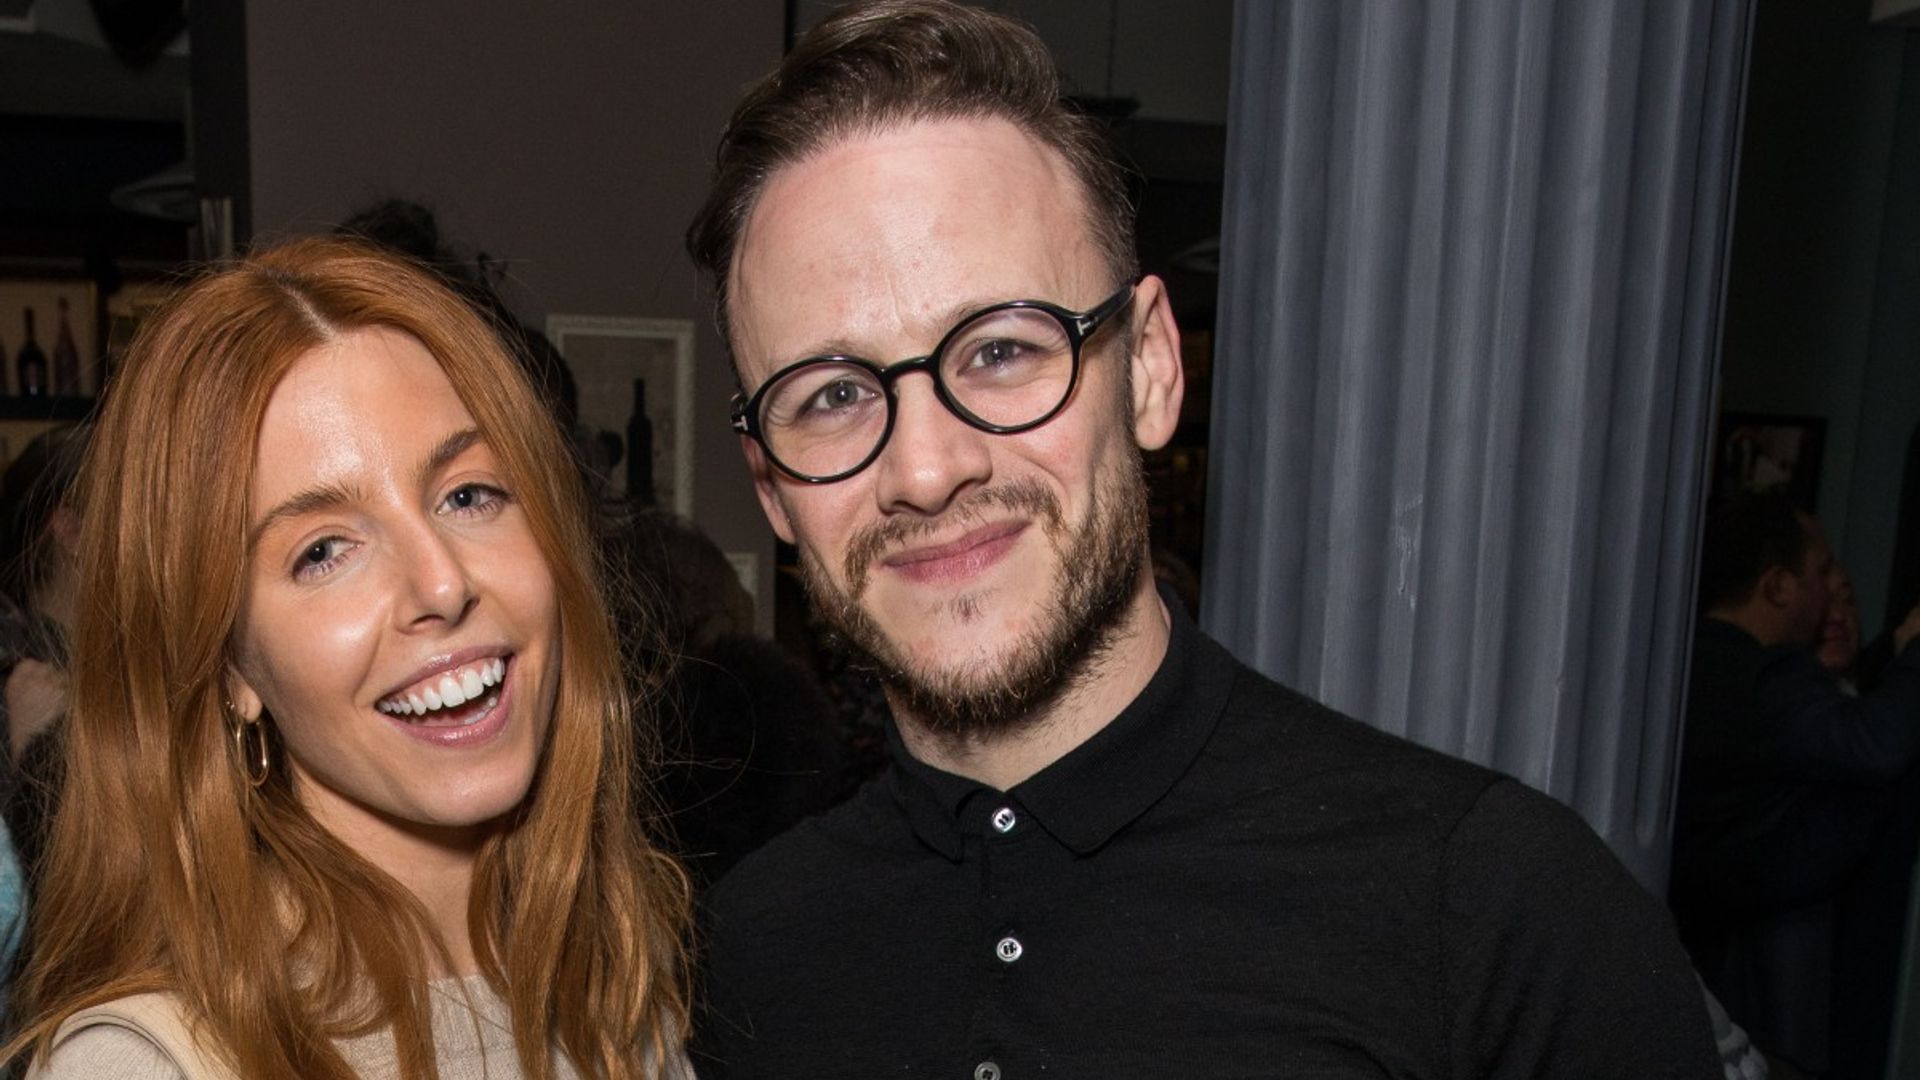 Kevin Clifton and Stacey Dooley share cute photo of their pre-Christmas treat